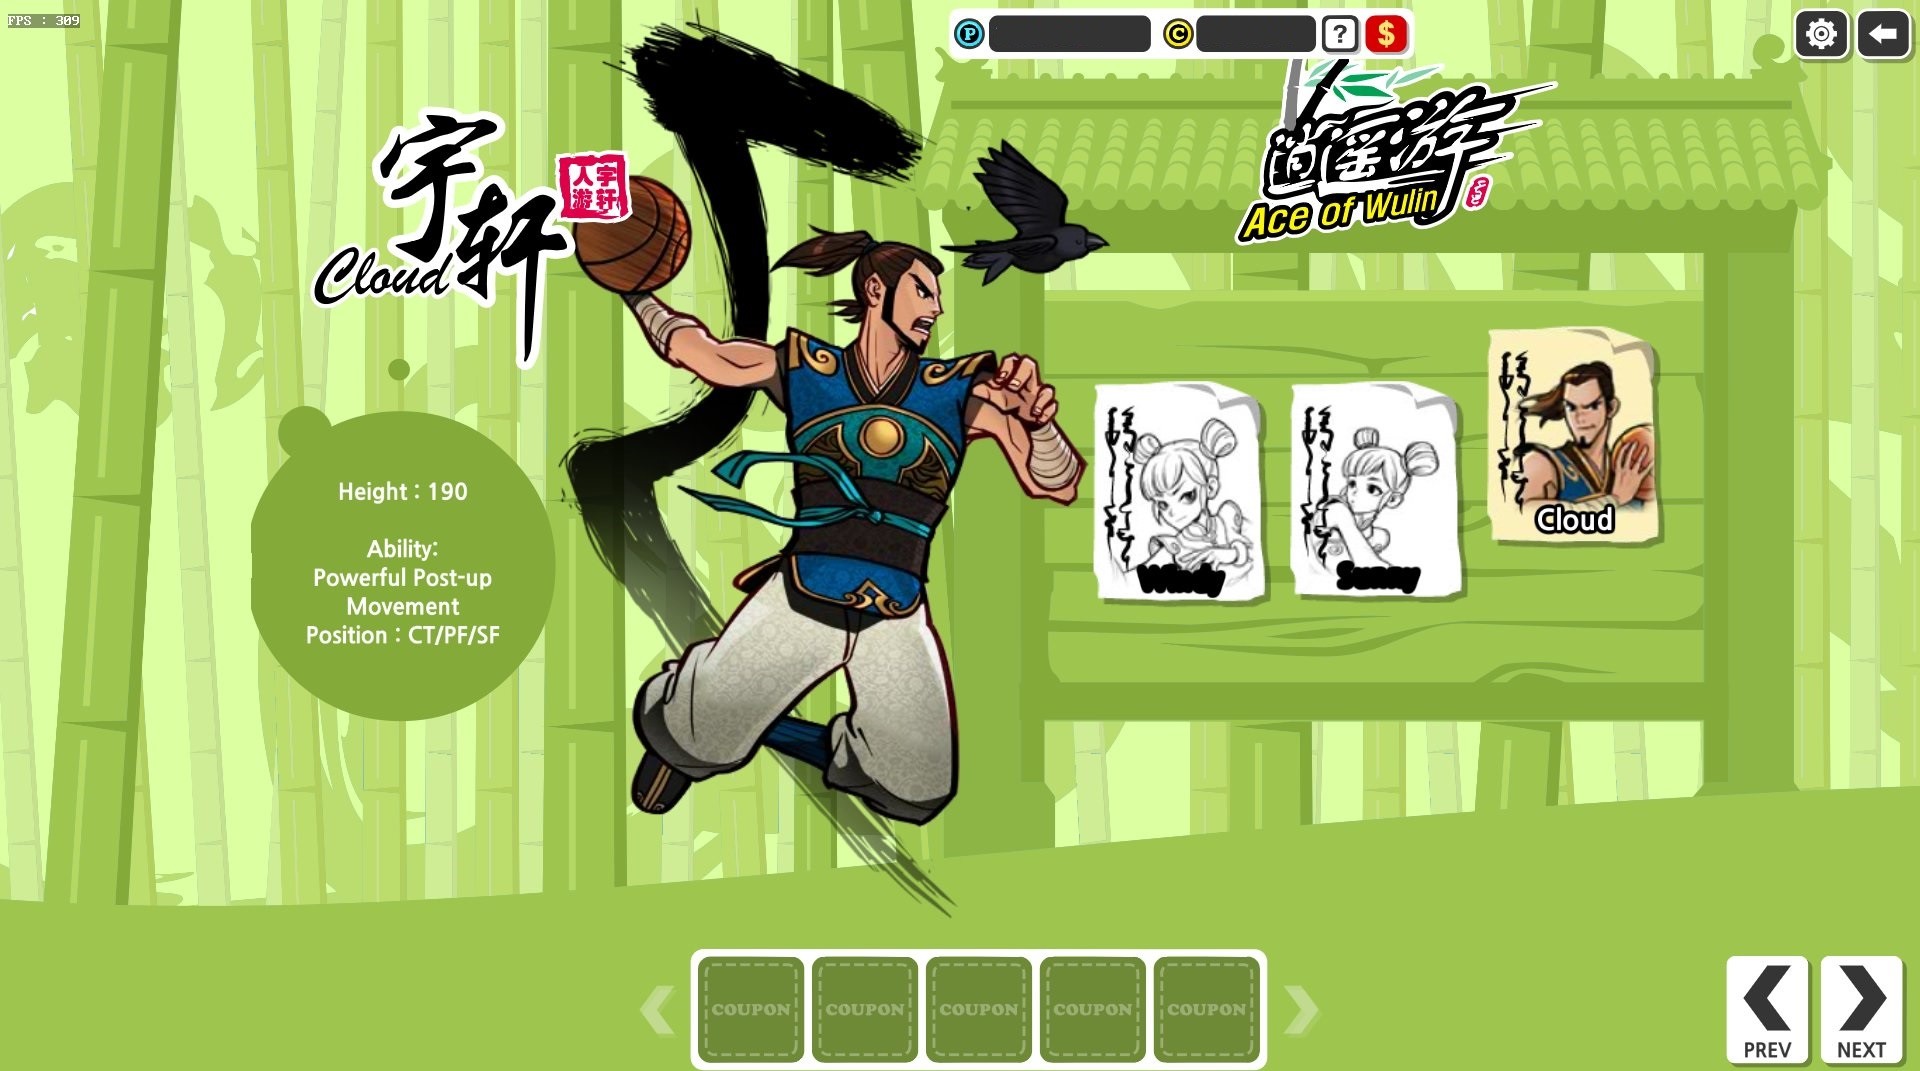 Freestyle2 - Ace of Wulin Character Coupon screenshot